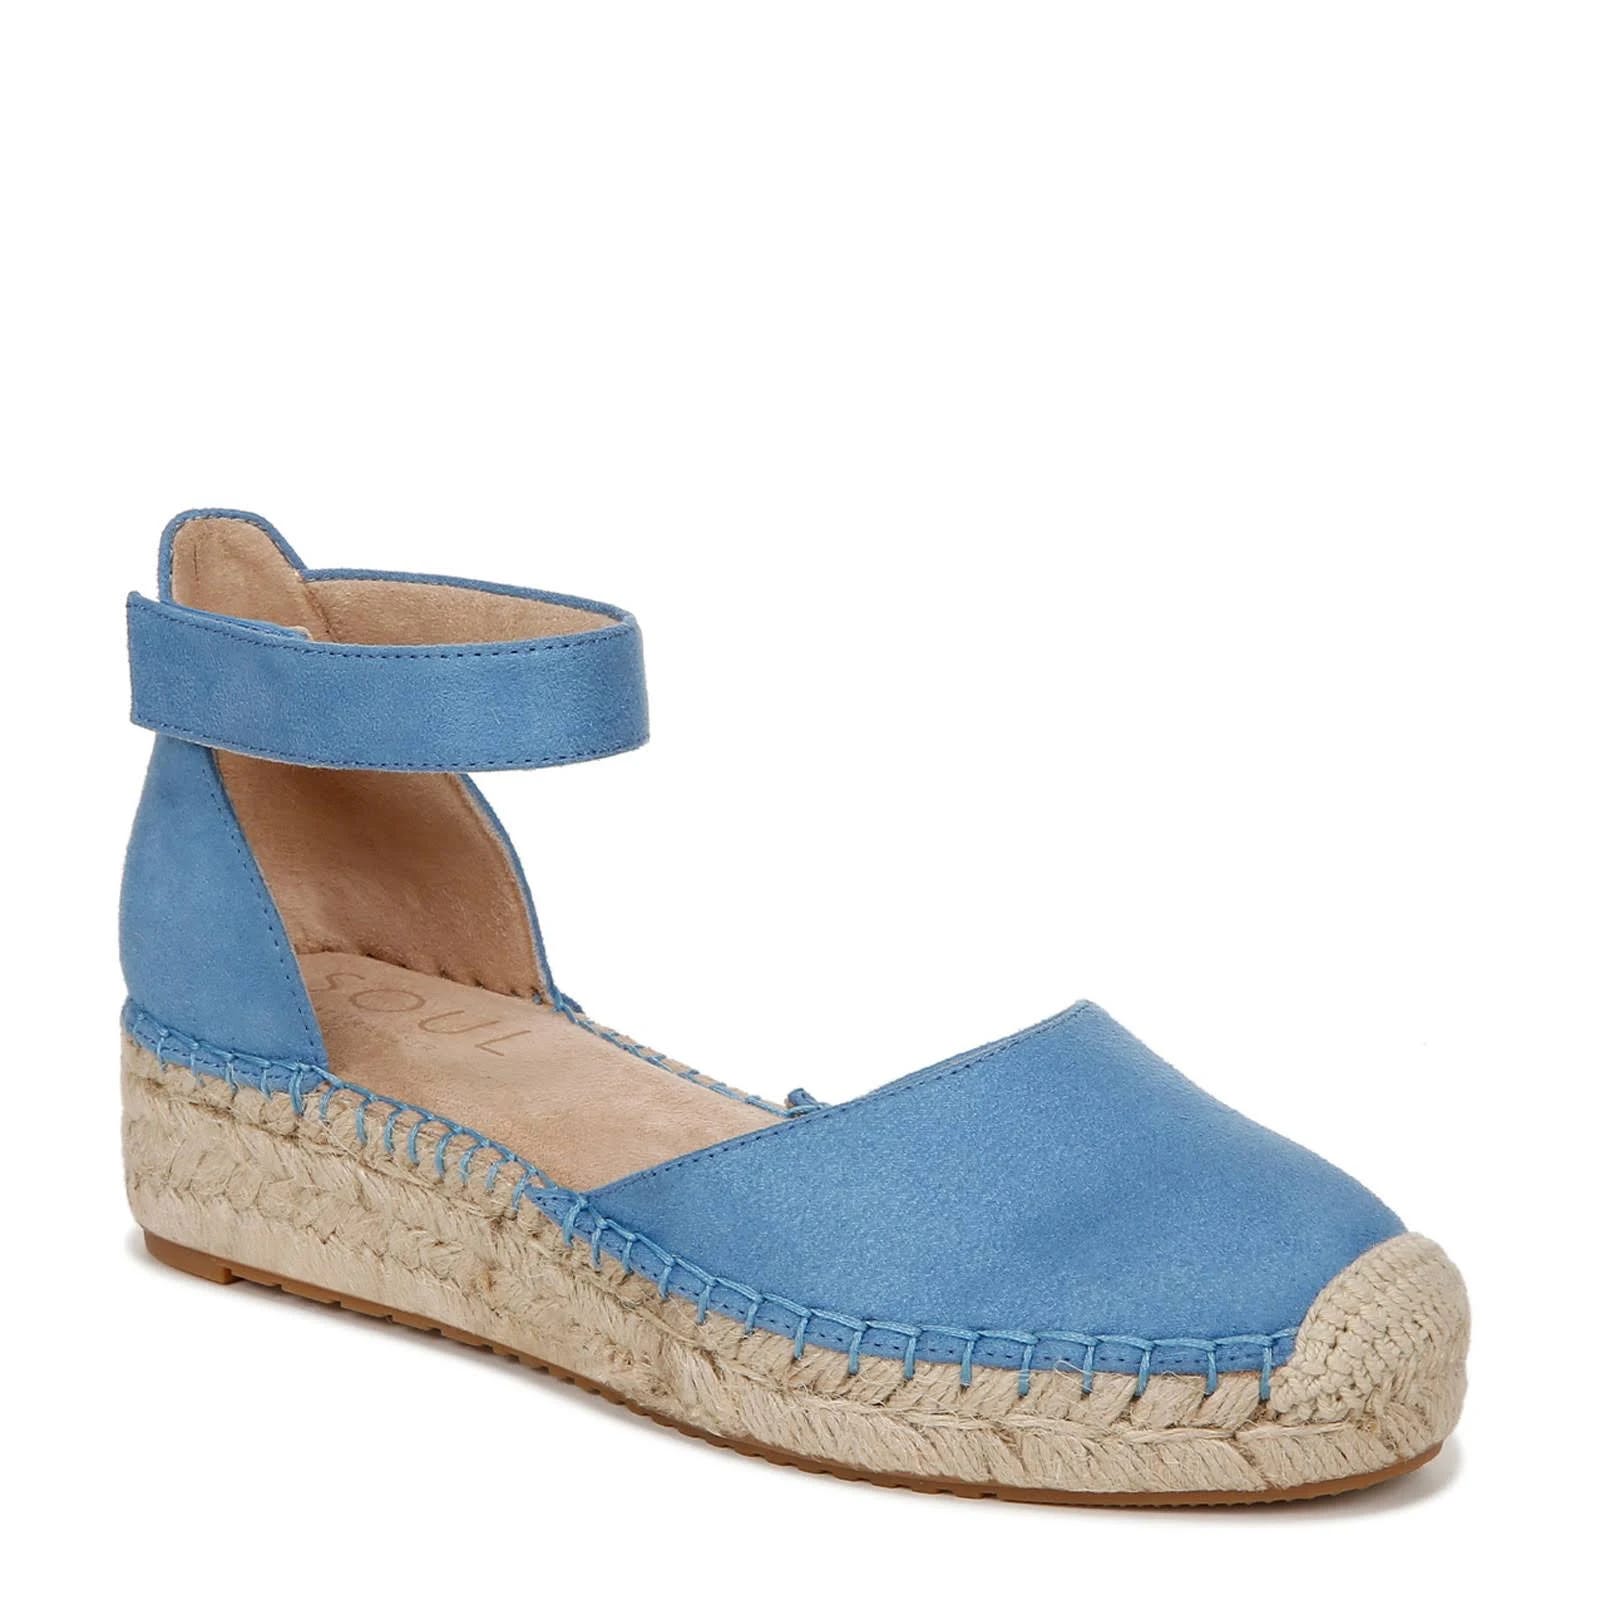 Soul Naturalizer Wren Espadrilles: Luxe Blue Wedge Shoes with Memory Foam Cushioning | Image